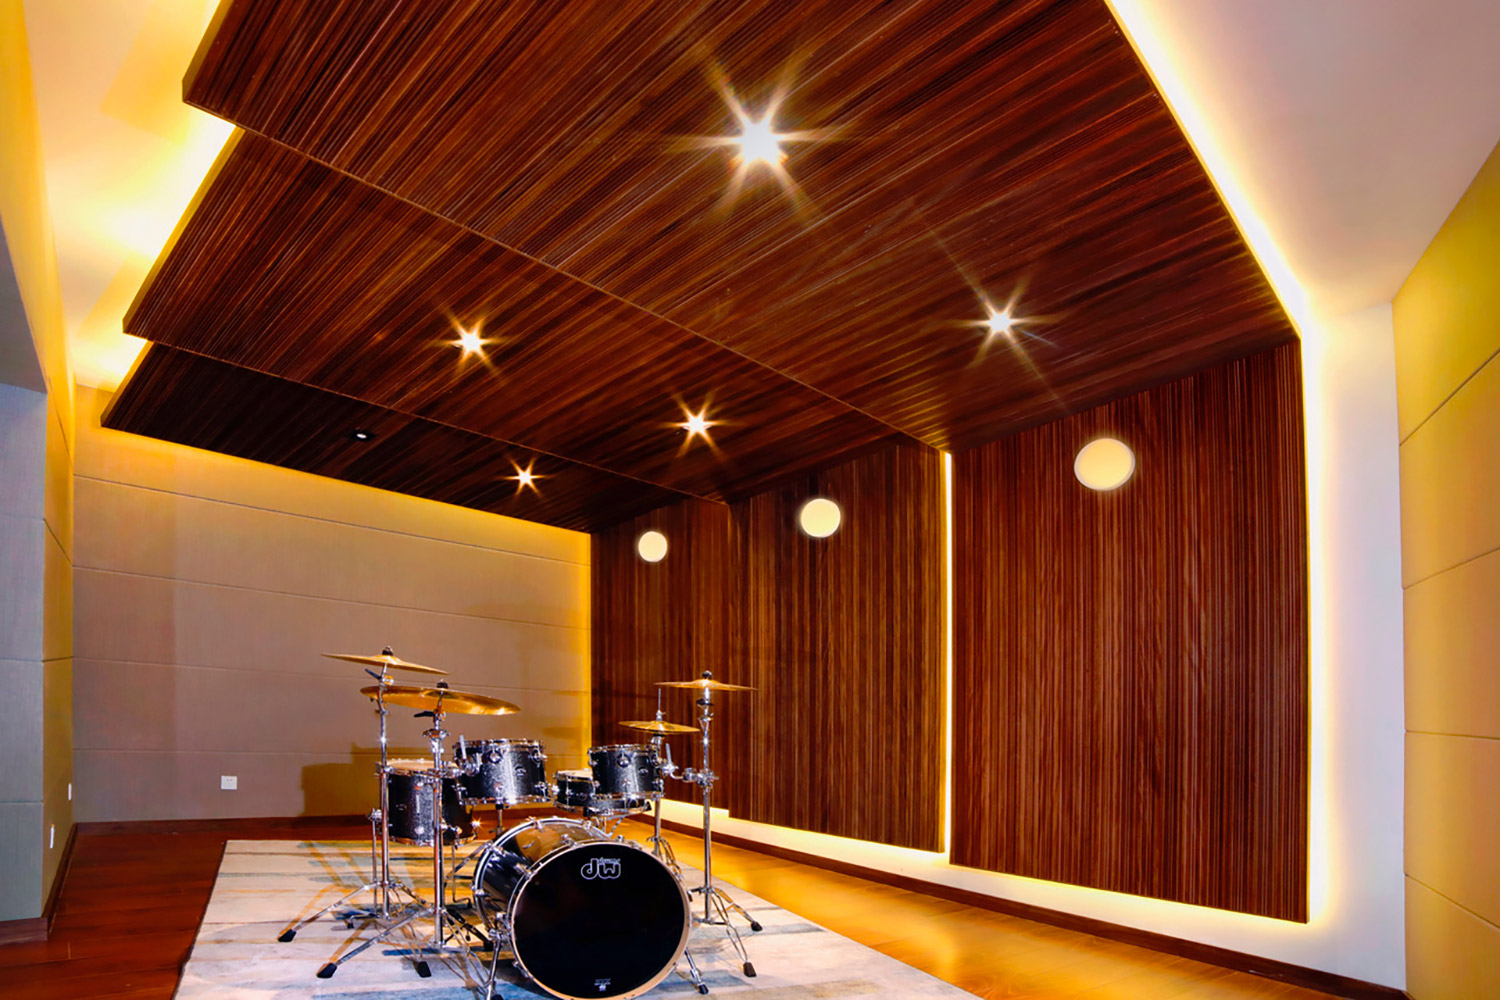 Zhejiang Conservatory of Music in Hangzhou, East China commissioned WSDG to create an important addition to this extraordinary institution, a 21st Century Music Production & Education Complex. Boutique ISO Booth with Drum set.